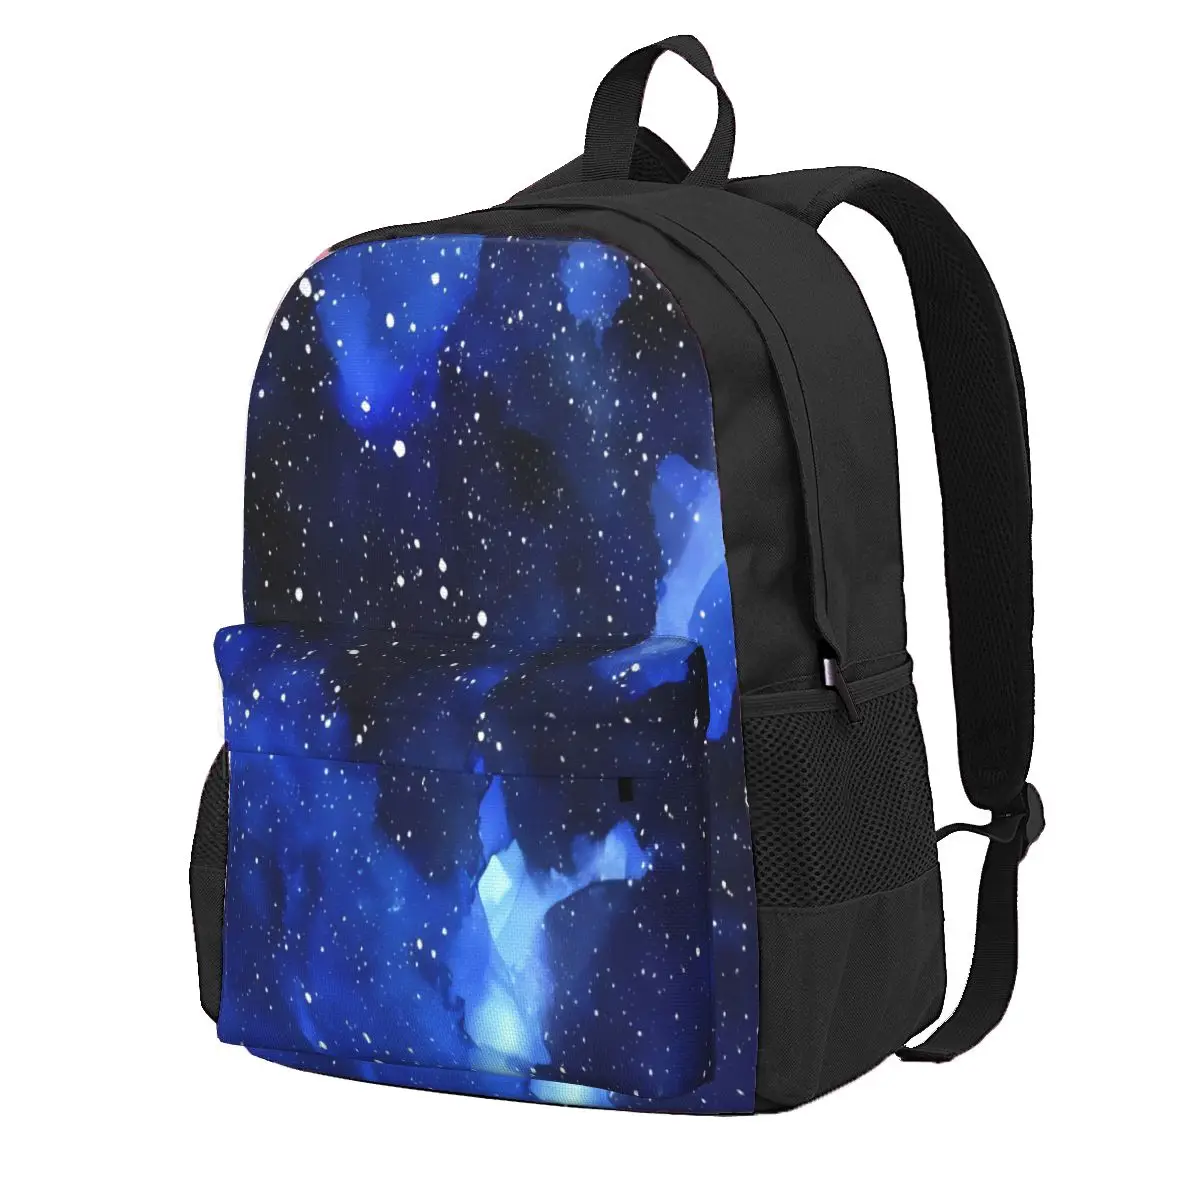 

Starry Sky Fashion Women'S Backpack New Travel Bag Waterproof Schoolbag Male Large-Capacity Student Schoolbag